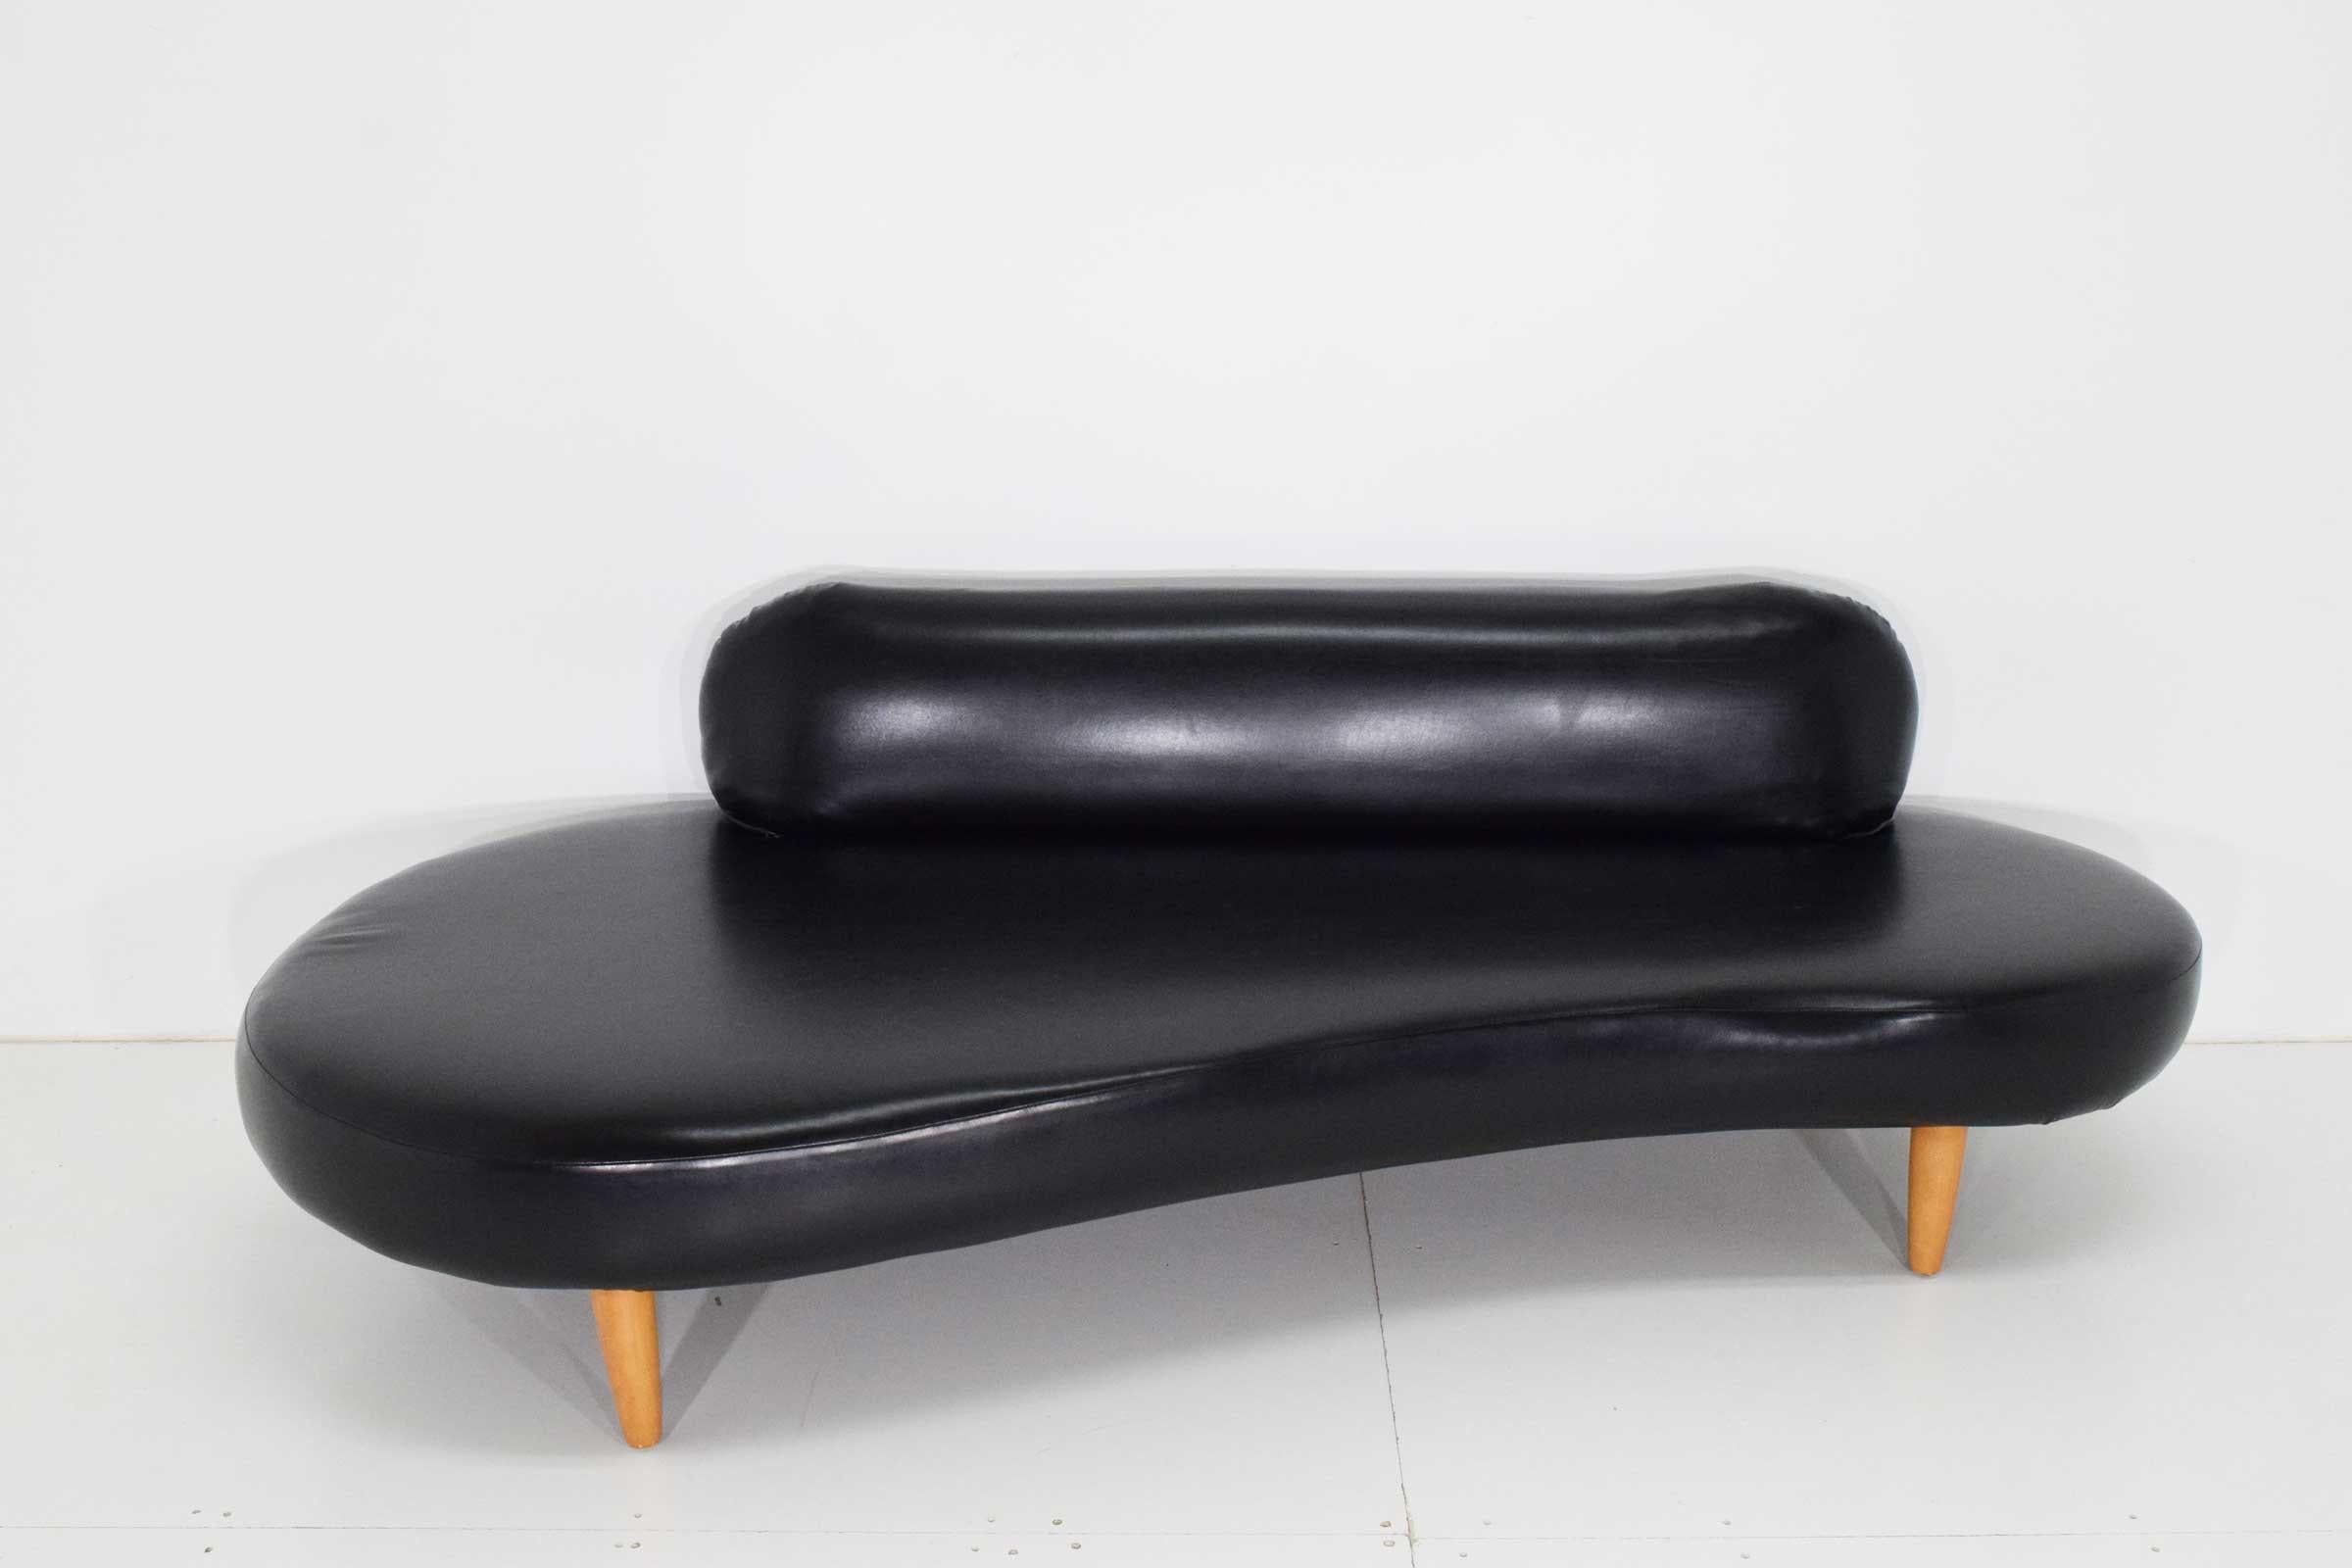 The Noguchi sofa is no longer offered by Palazzetti. This one is executued Naugahyde.
About Palazetti:
Palazzetti created access to the public for the Classic of Modern Furniture in 1981. Since then Palazzetti has refined its collection to include